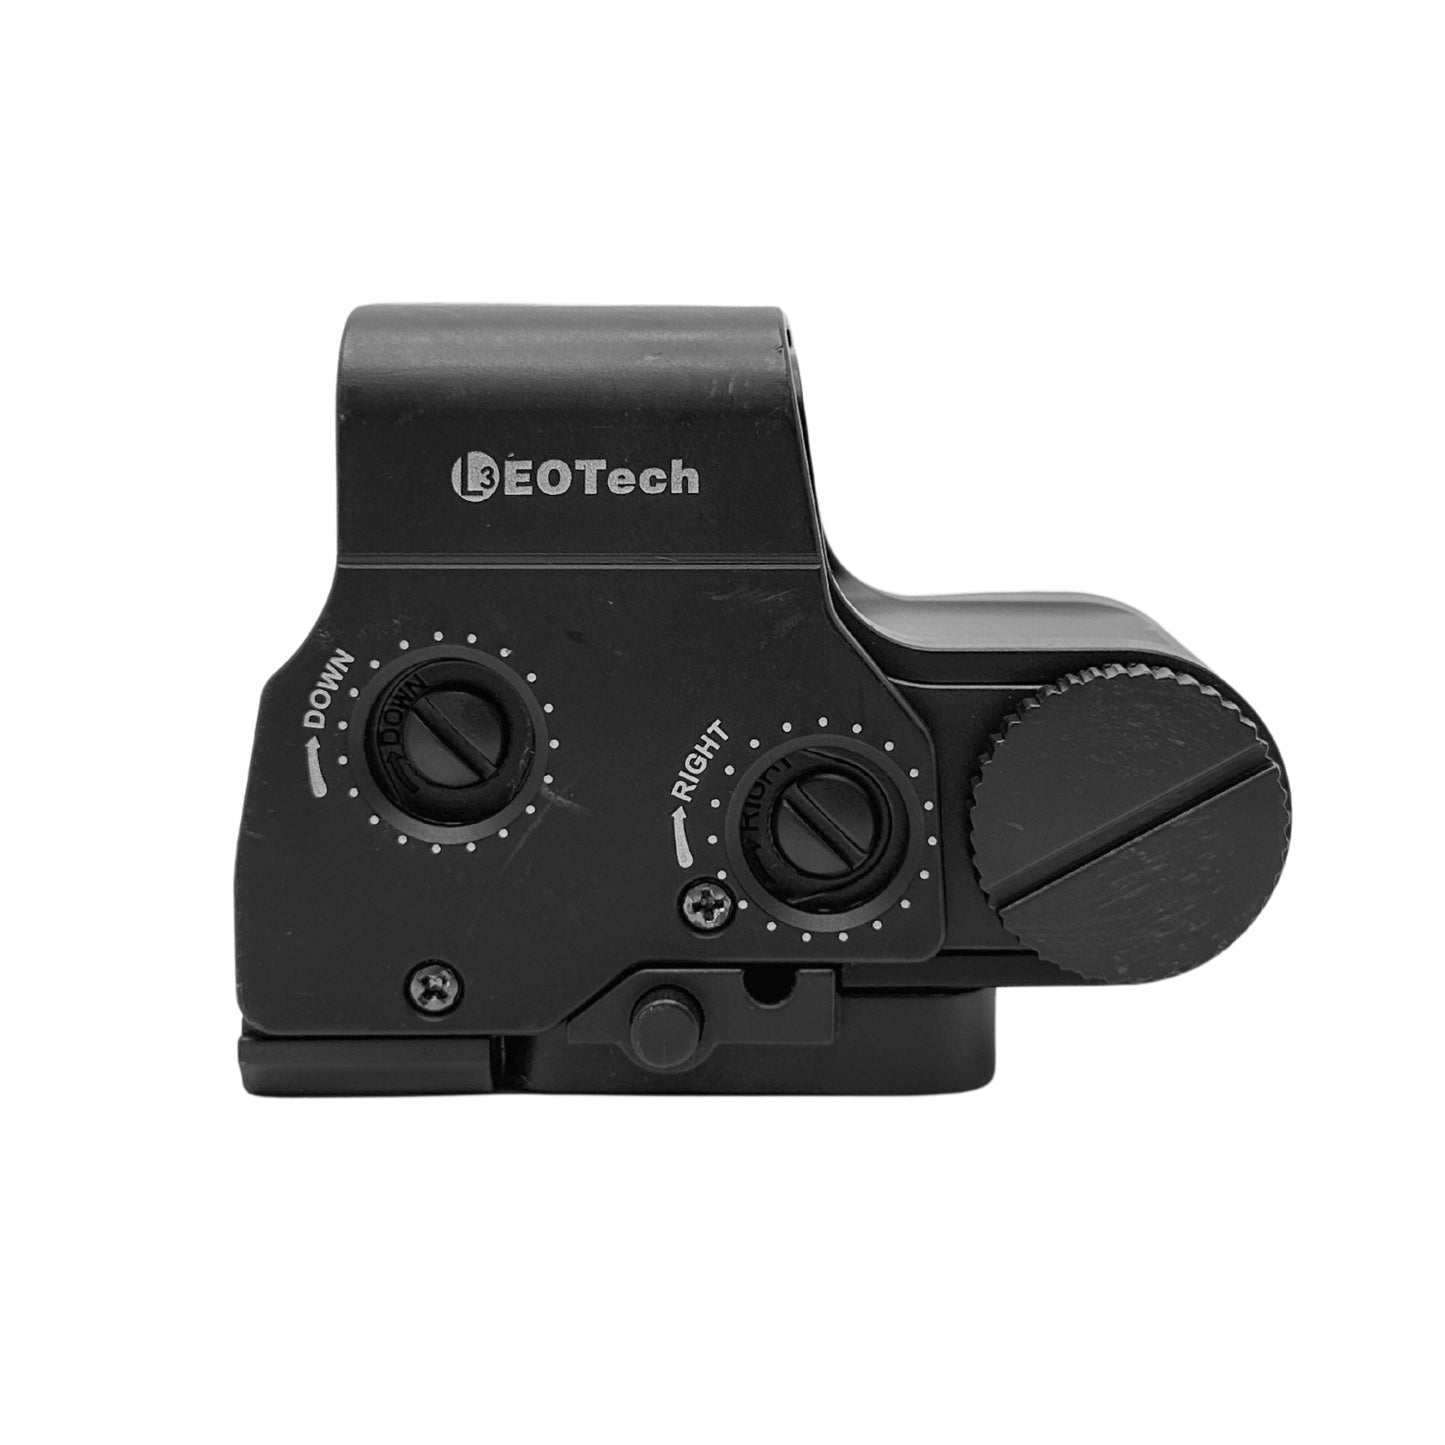 PLASTIC 558 EOTECH Holographic Scope Sight for 20mm Width Rail